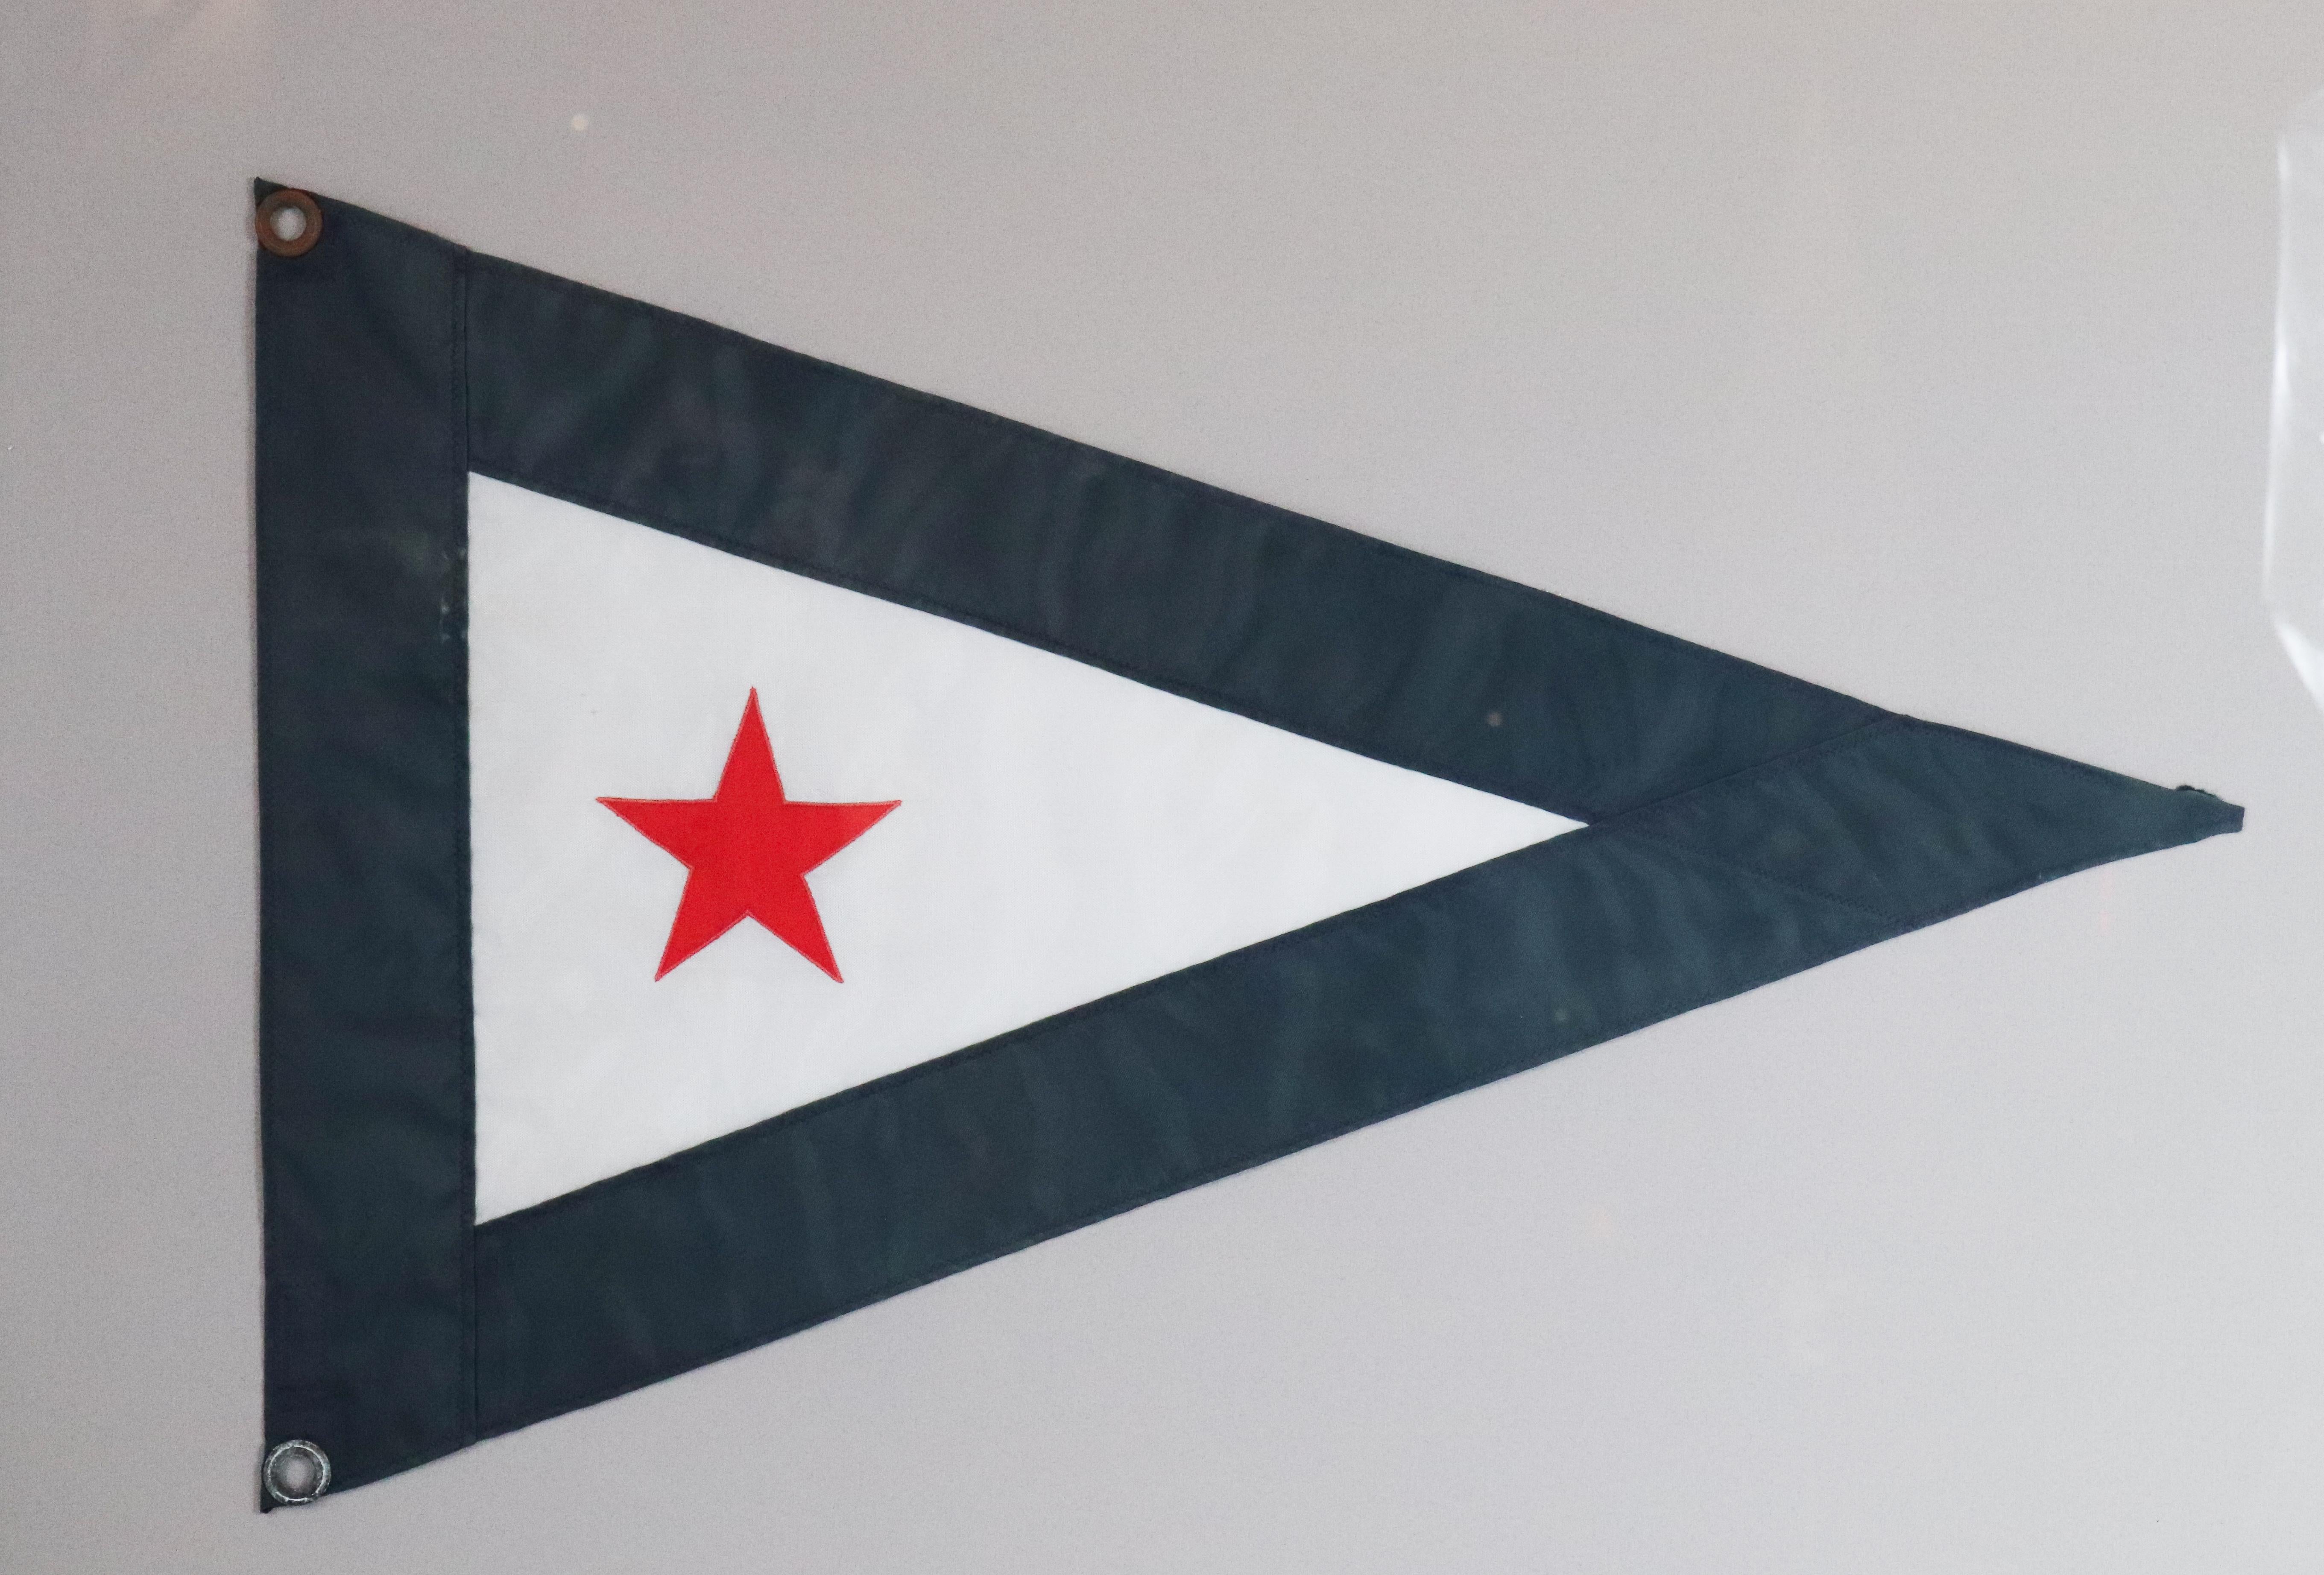 Red, white and blue burgee showing a red star on white field with blue border. Nicely framed with gray mat. 26